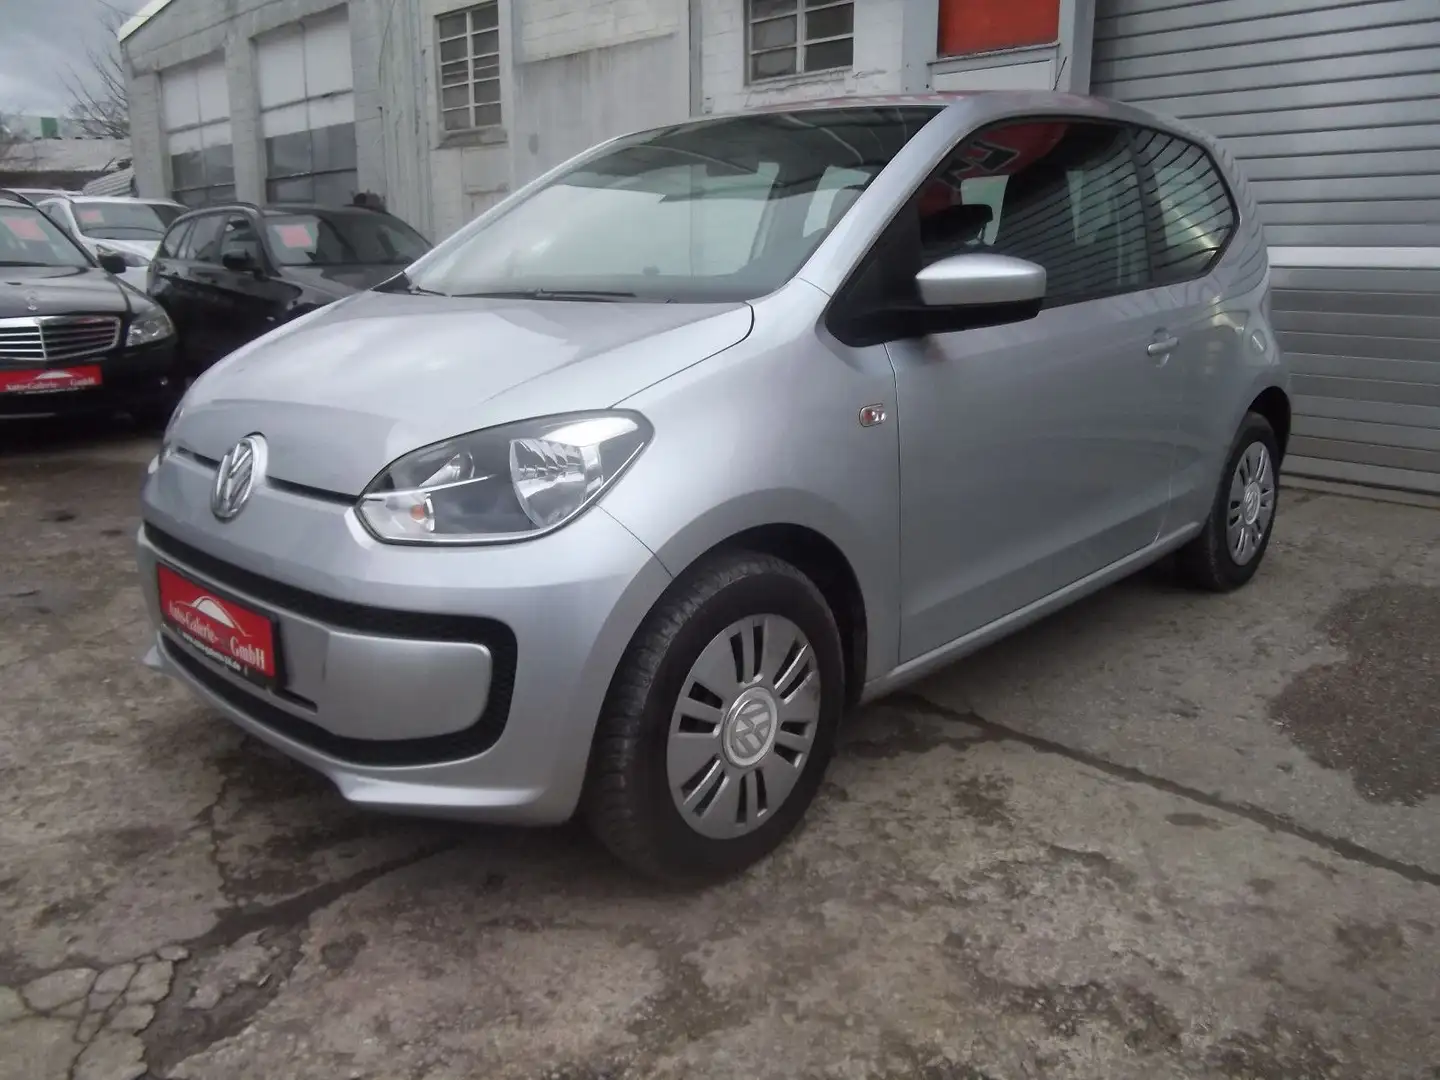 Volkswagen up! move up! Silver - 2